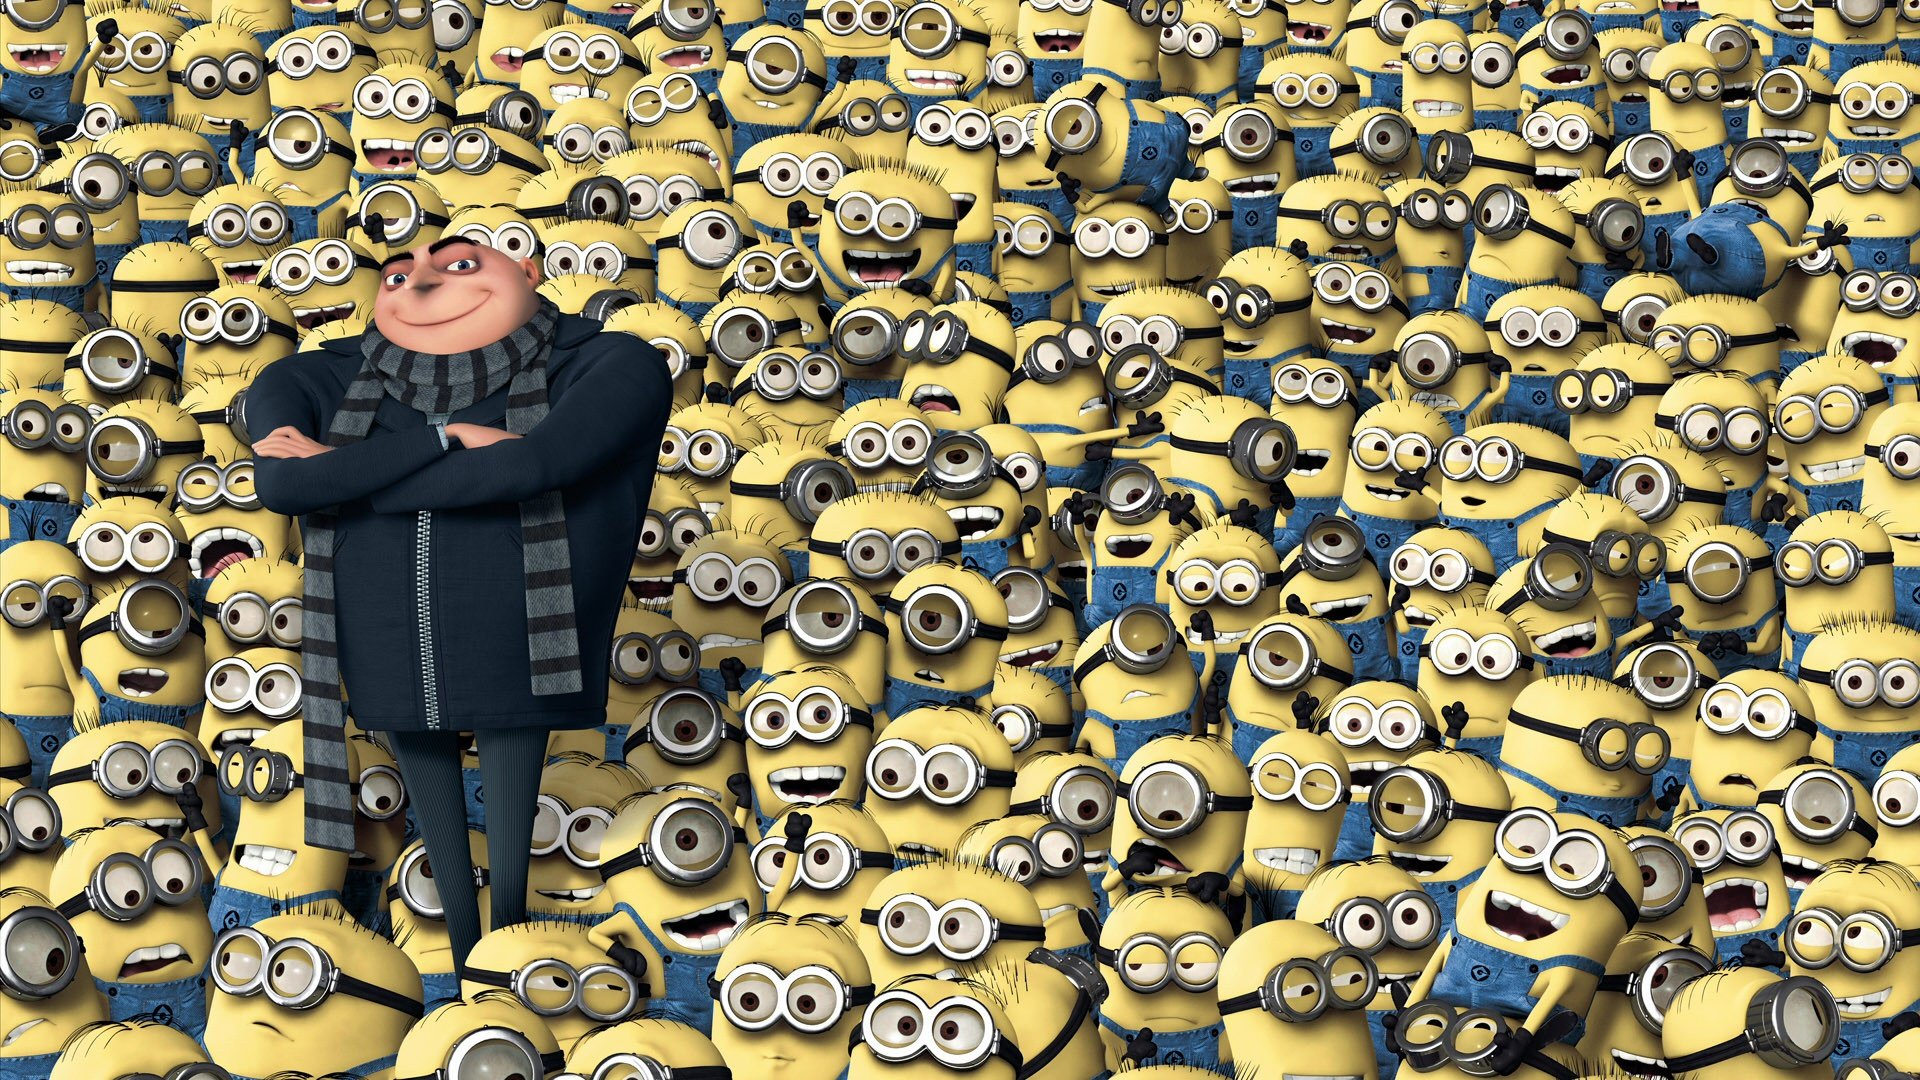 Desktop Wallpaper Despicable Me 3 Movie Gru Minions Animation Movie Hd  Image Picture Background Iyamsq